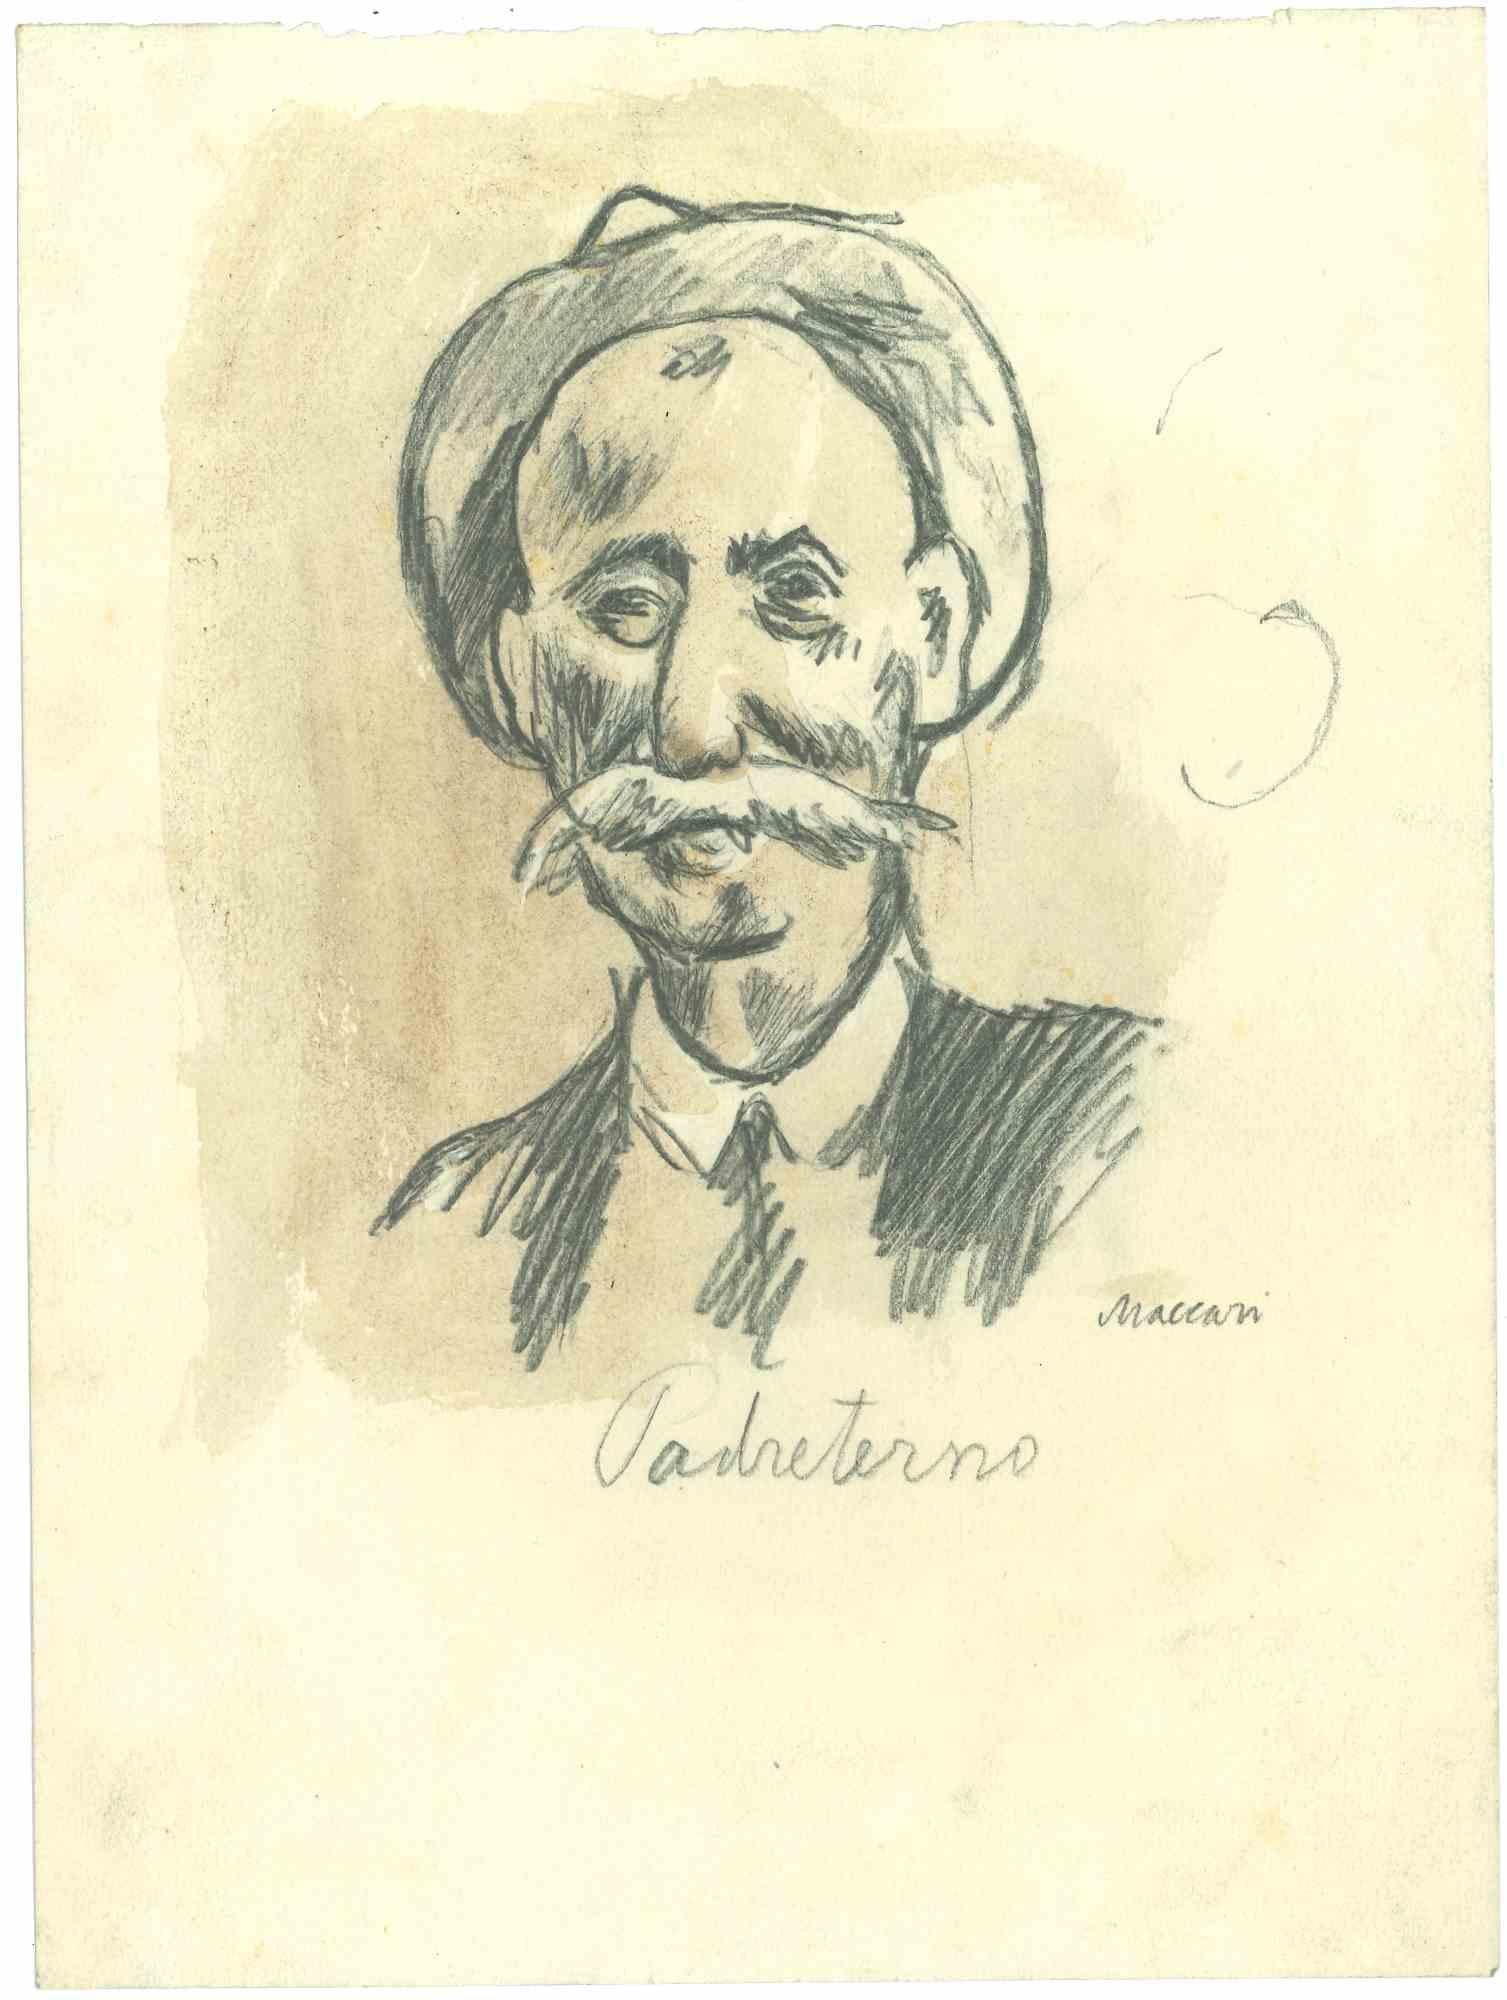 Portrait of Padreterno is an Original  Drawing in pencil and watercolor on creamy-colored paper realized by Mino Maccari in the mid-20th century.

Hand-signed by the artist on the lower and titled.

Good conditions.

Mino Maccari (1898-1989) was an